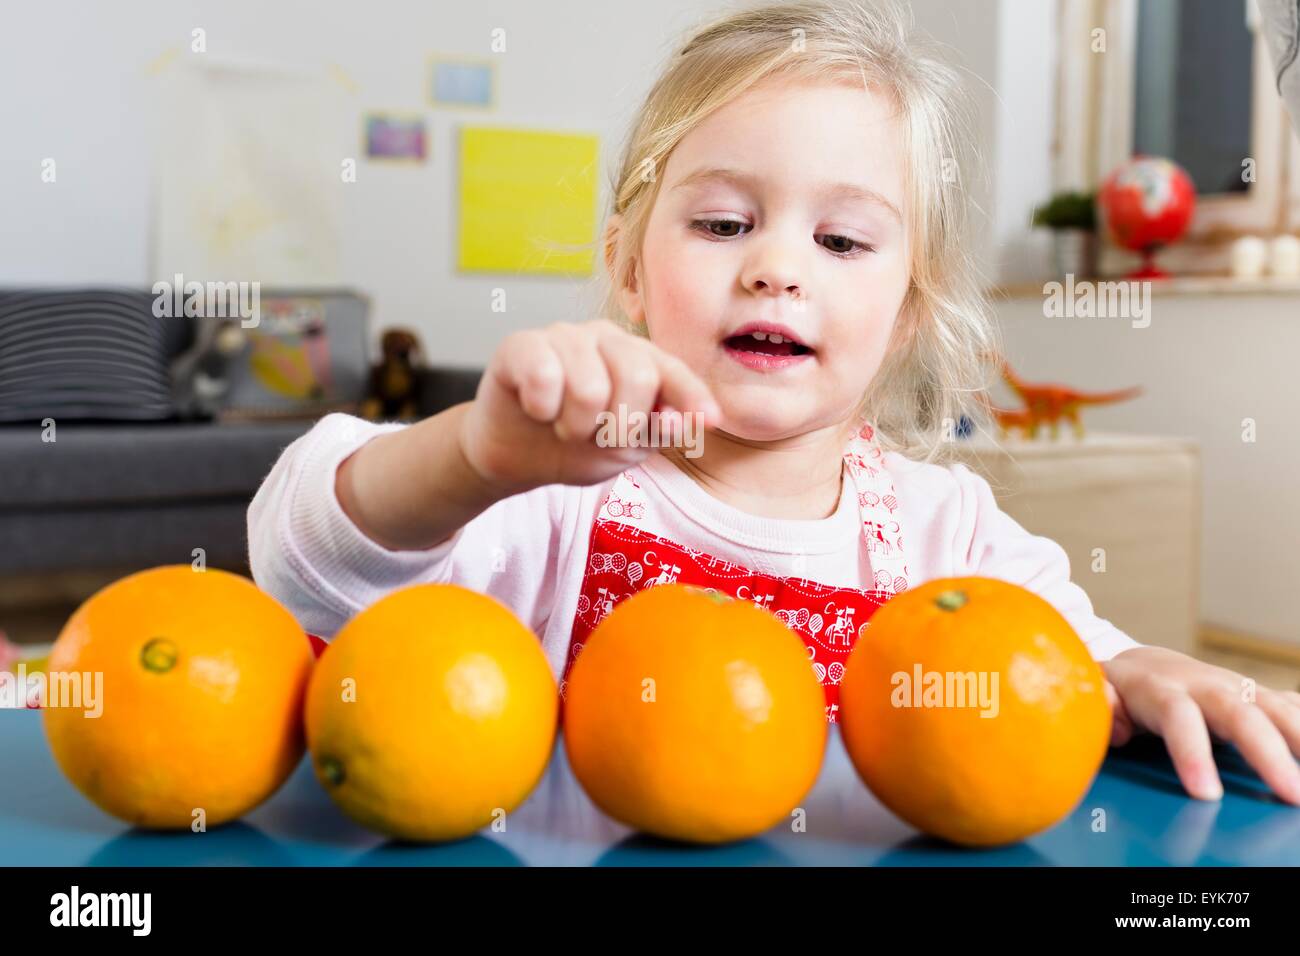 Girl counting oranges on table Stock Photo